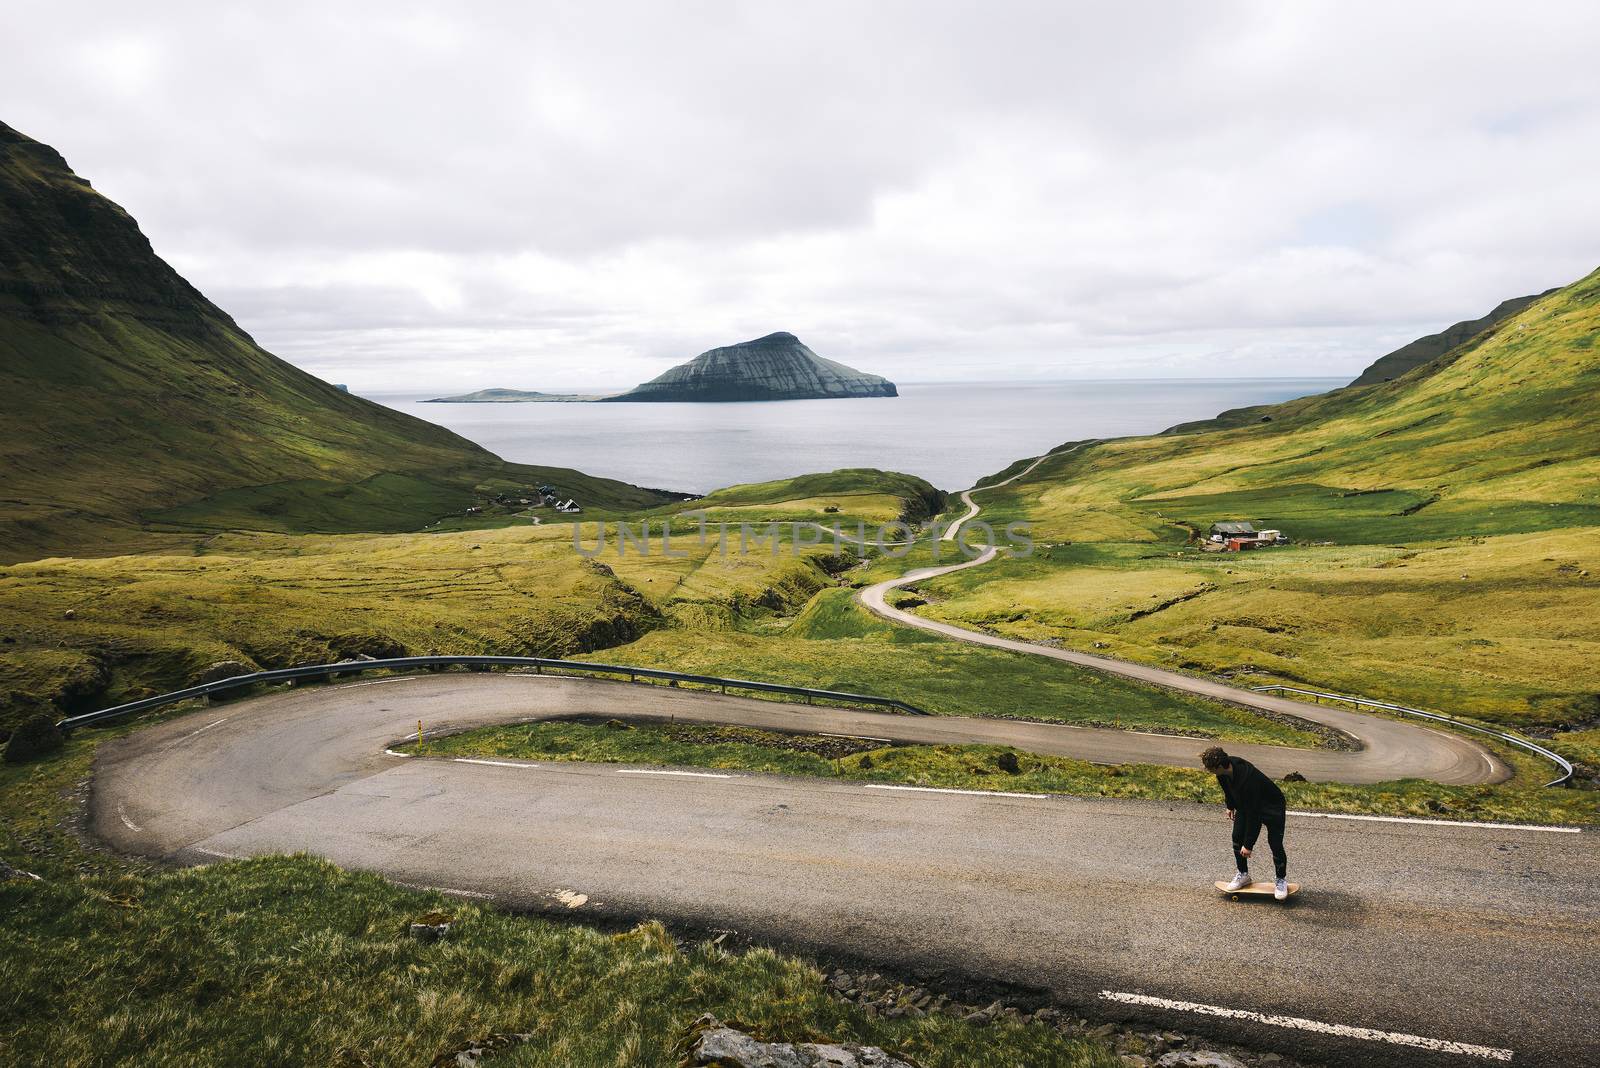 Young skater riding a skateboard through the beatiful scenery of Faroe Islands by nickfox